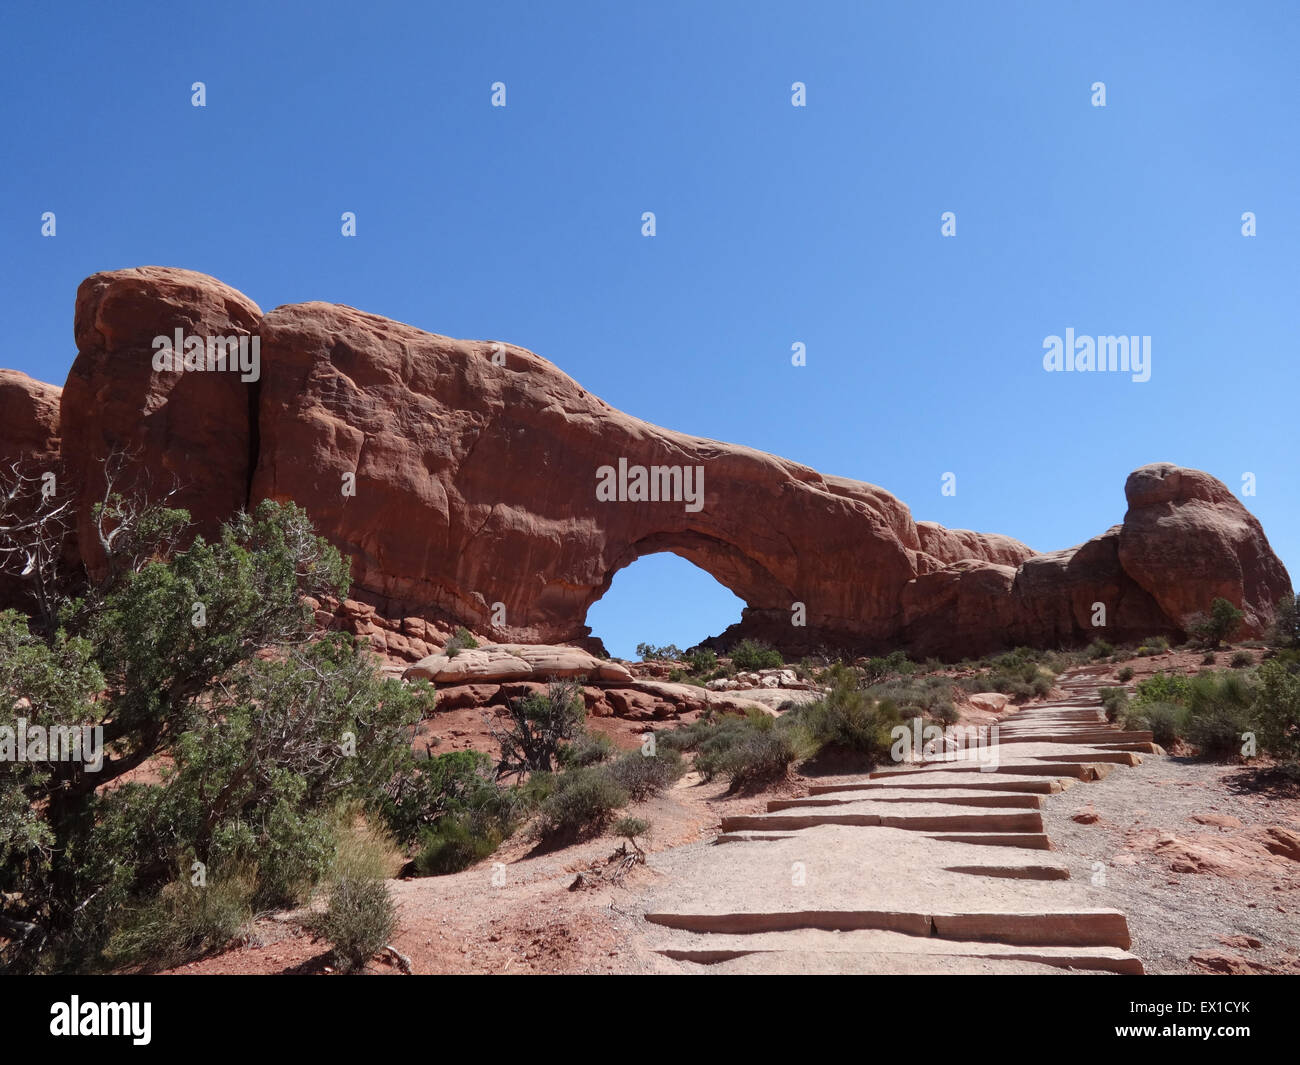 The famous Arches national park in the USA. Stock Photo